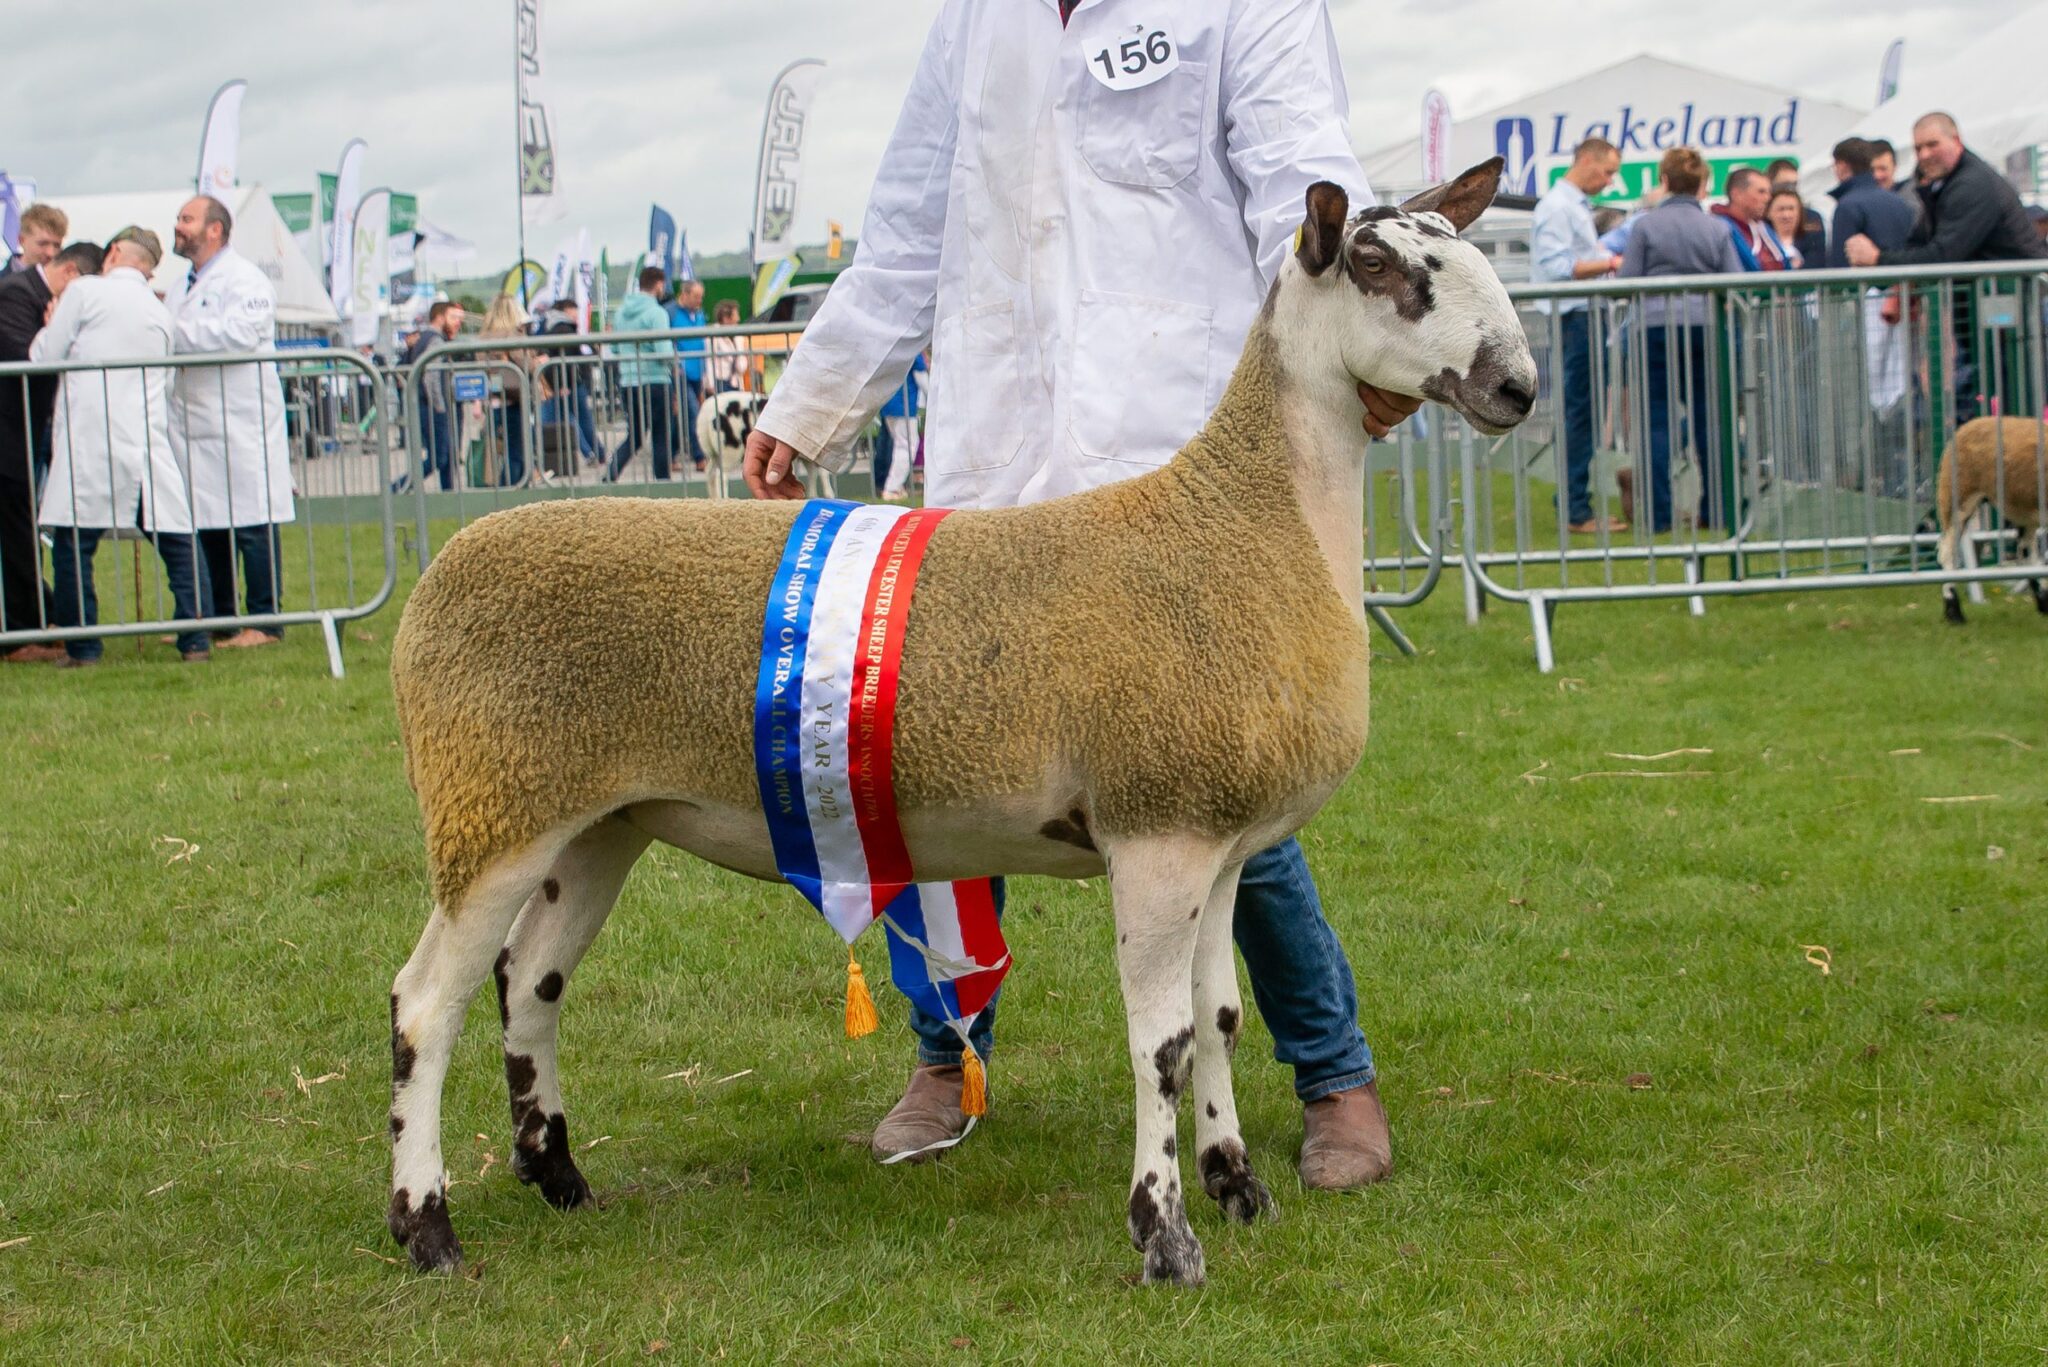 Balmoral Show – Bluefaced Leicester – Overall Champion Longwool News